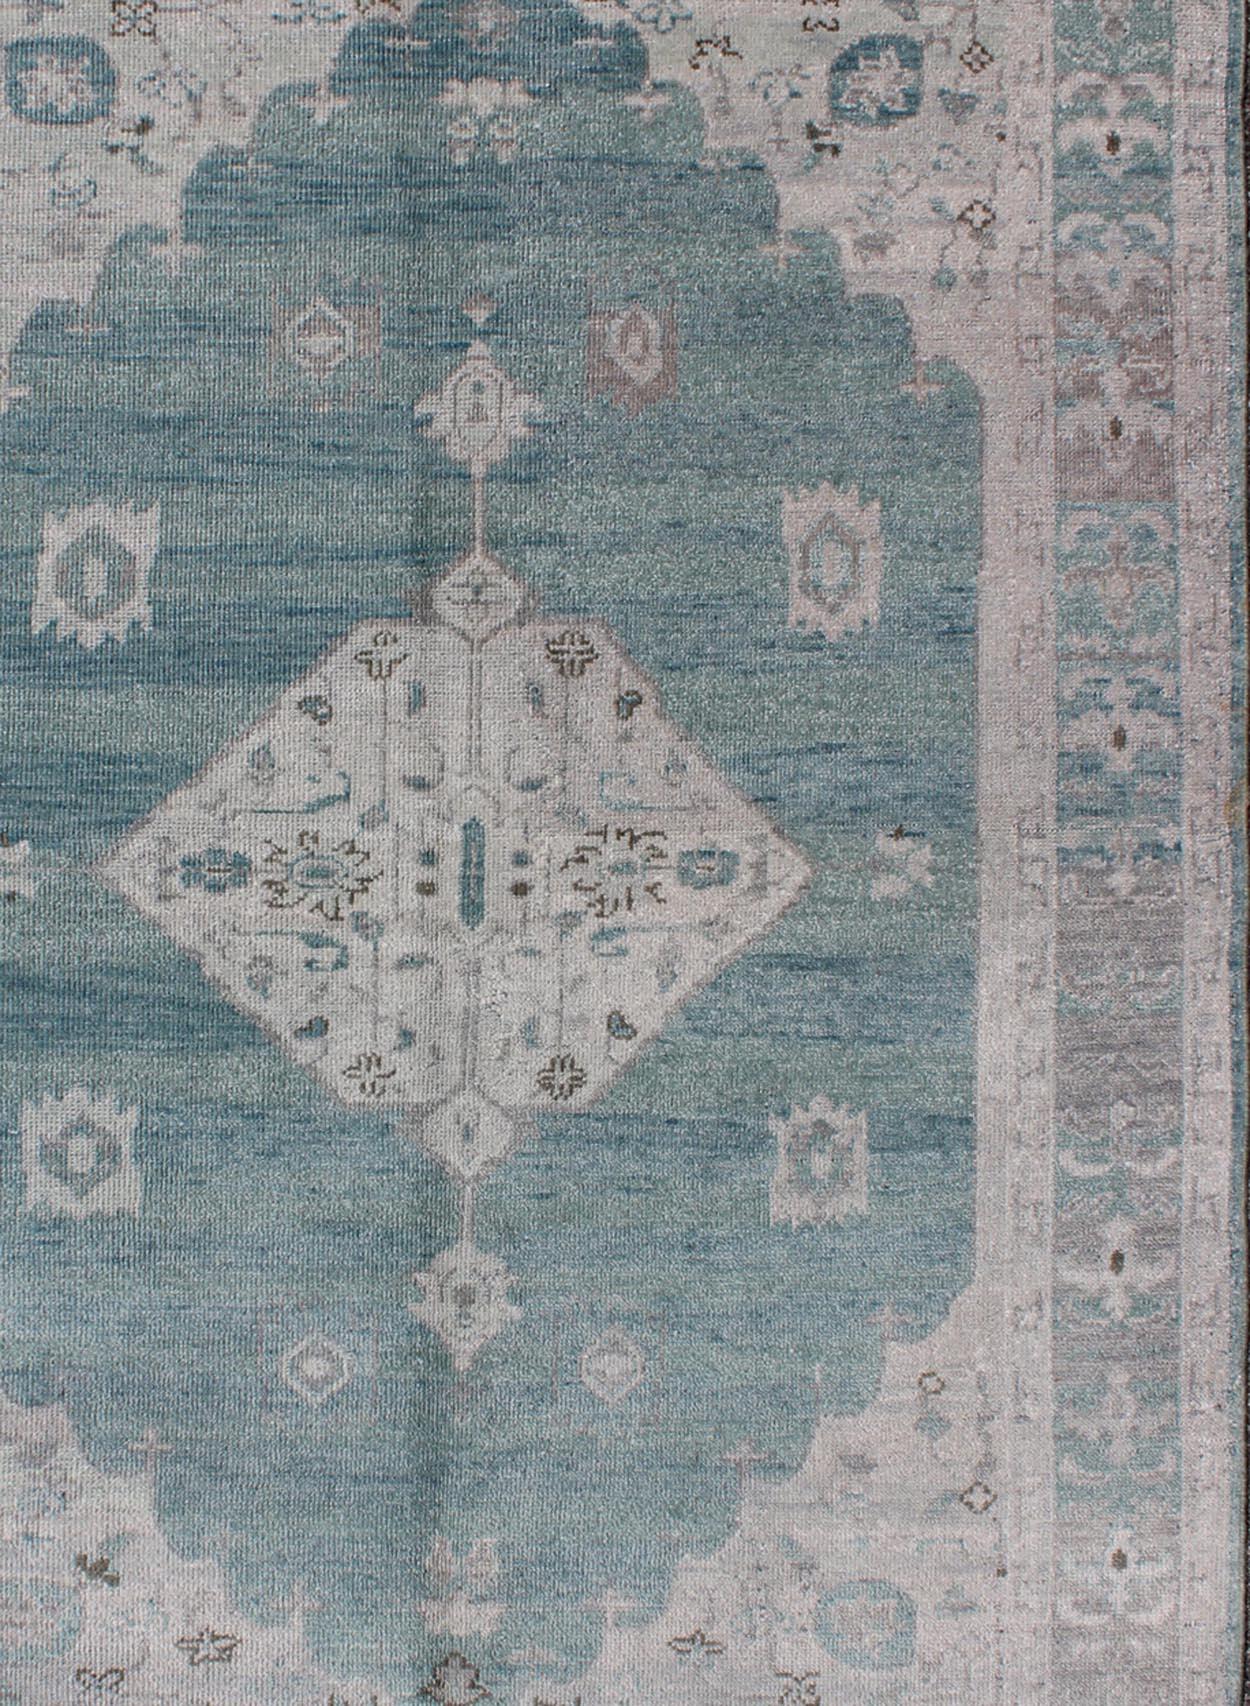 Oushak Design Rug with Center Medallion, Keivan Woven Arts rug OB-9261247-0131046, country of origin / type: India / Oushak.

Measures: 4' x 6'.

This hand knotted Oushak rug features a beautiful center medallion design rendered in greys,